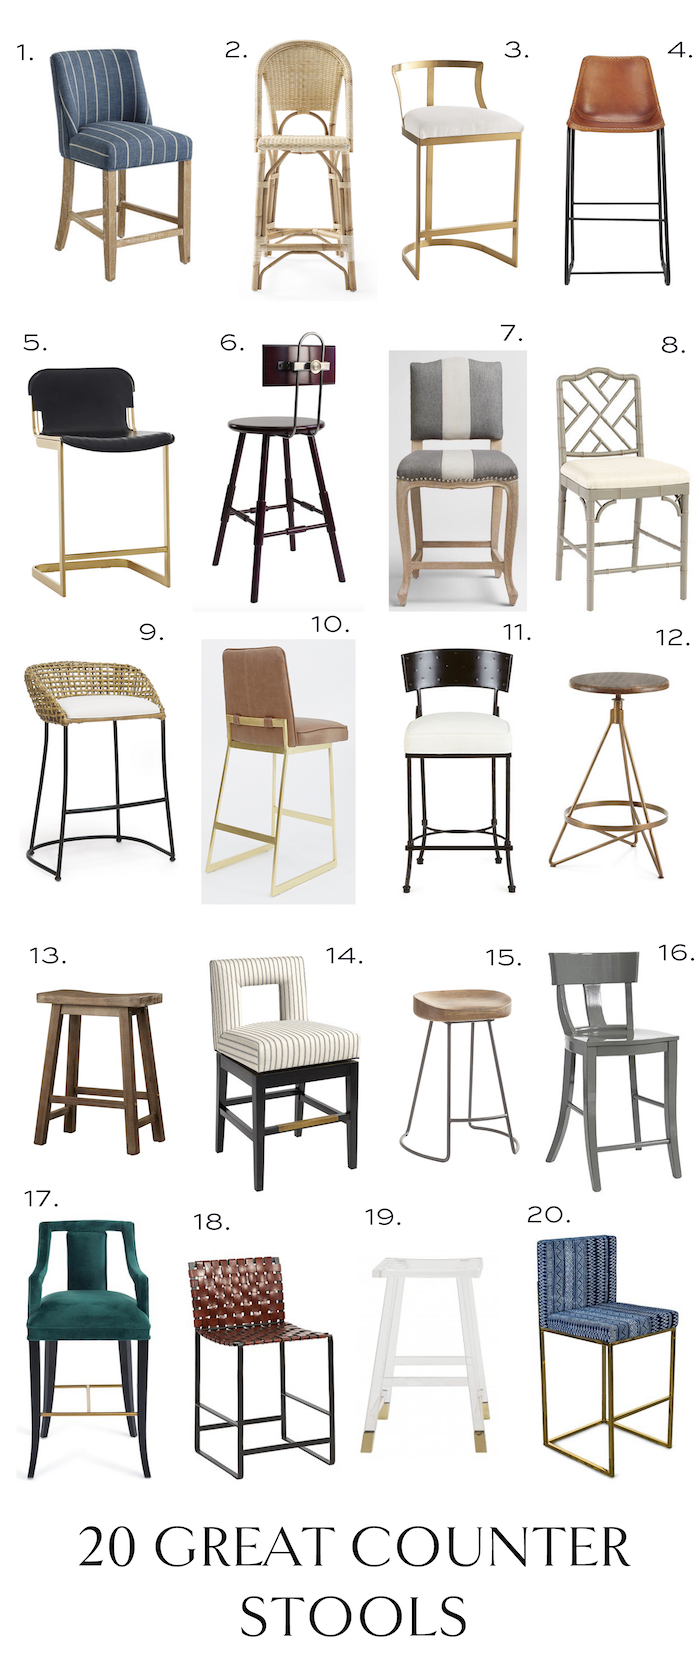 Counter Stool Roundup Elements Of, Best Selection Of Counter Stools